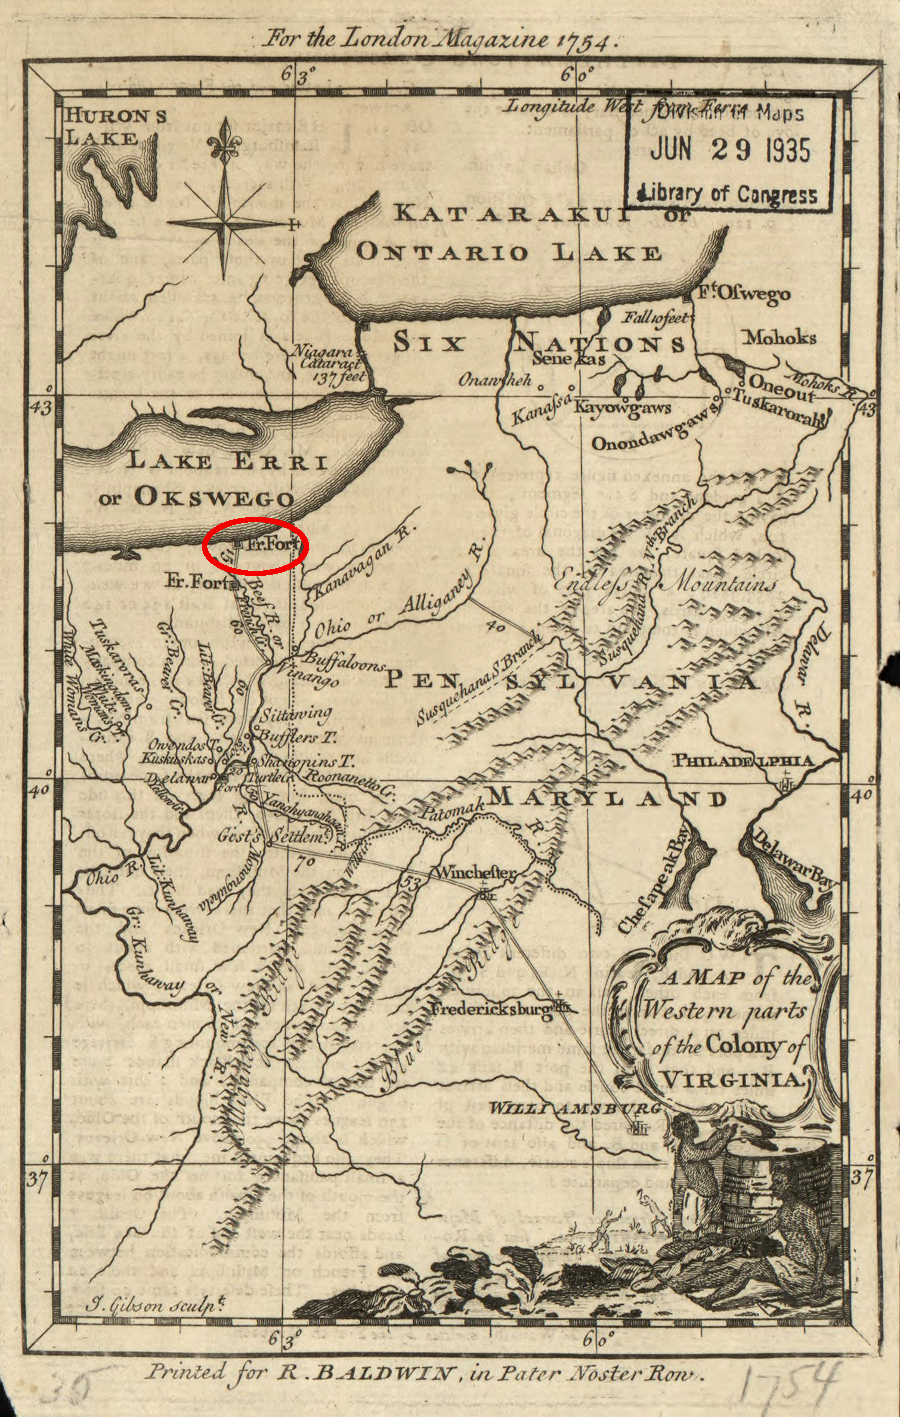 George Washington traveled from Williamsburg to the French fort near Lake Erie and back in later 1753